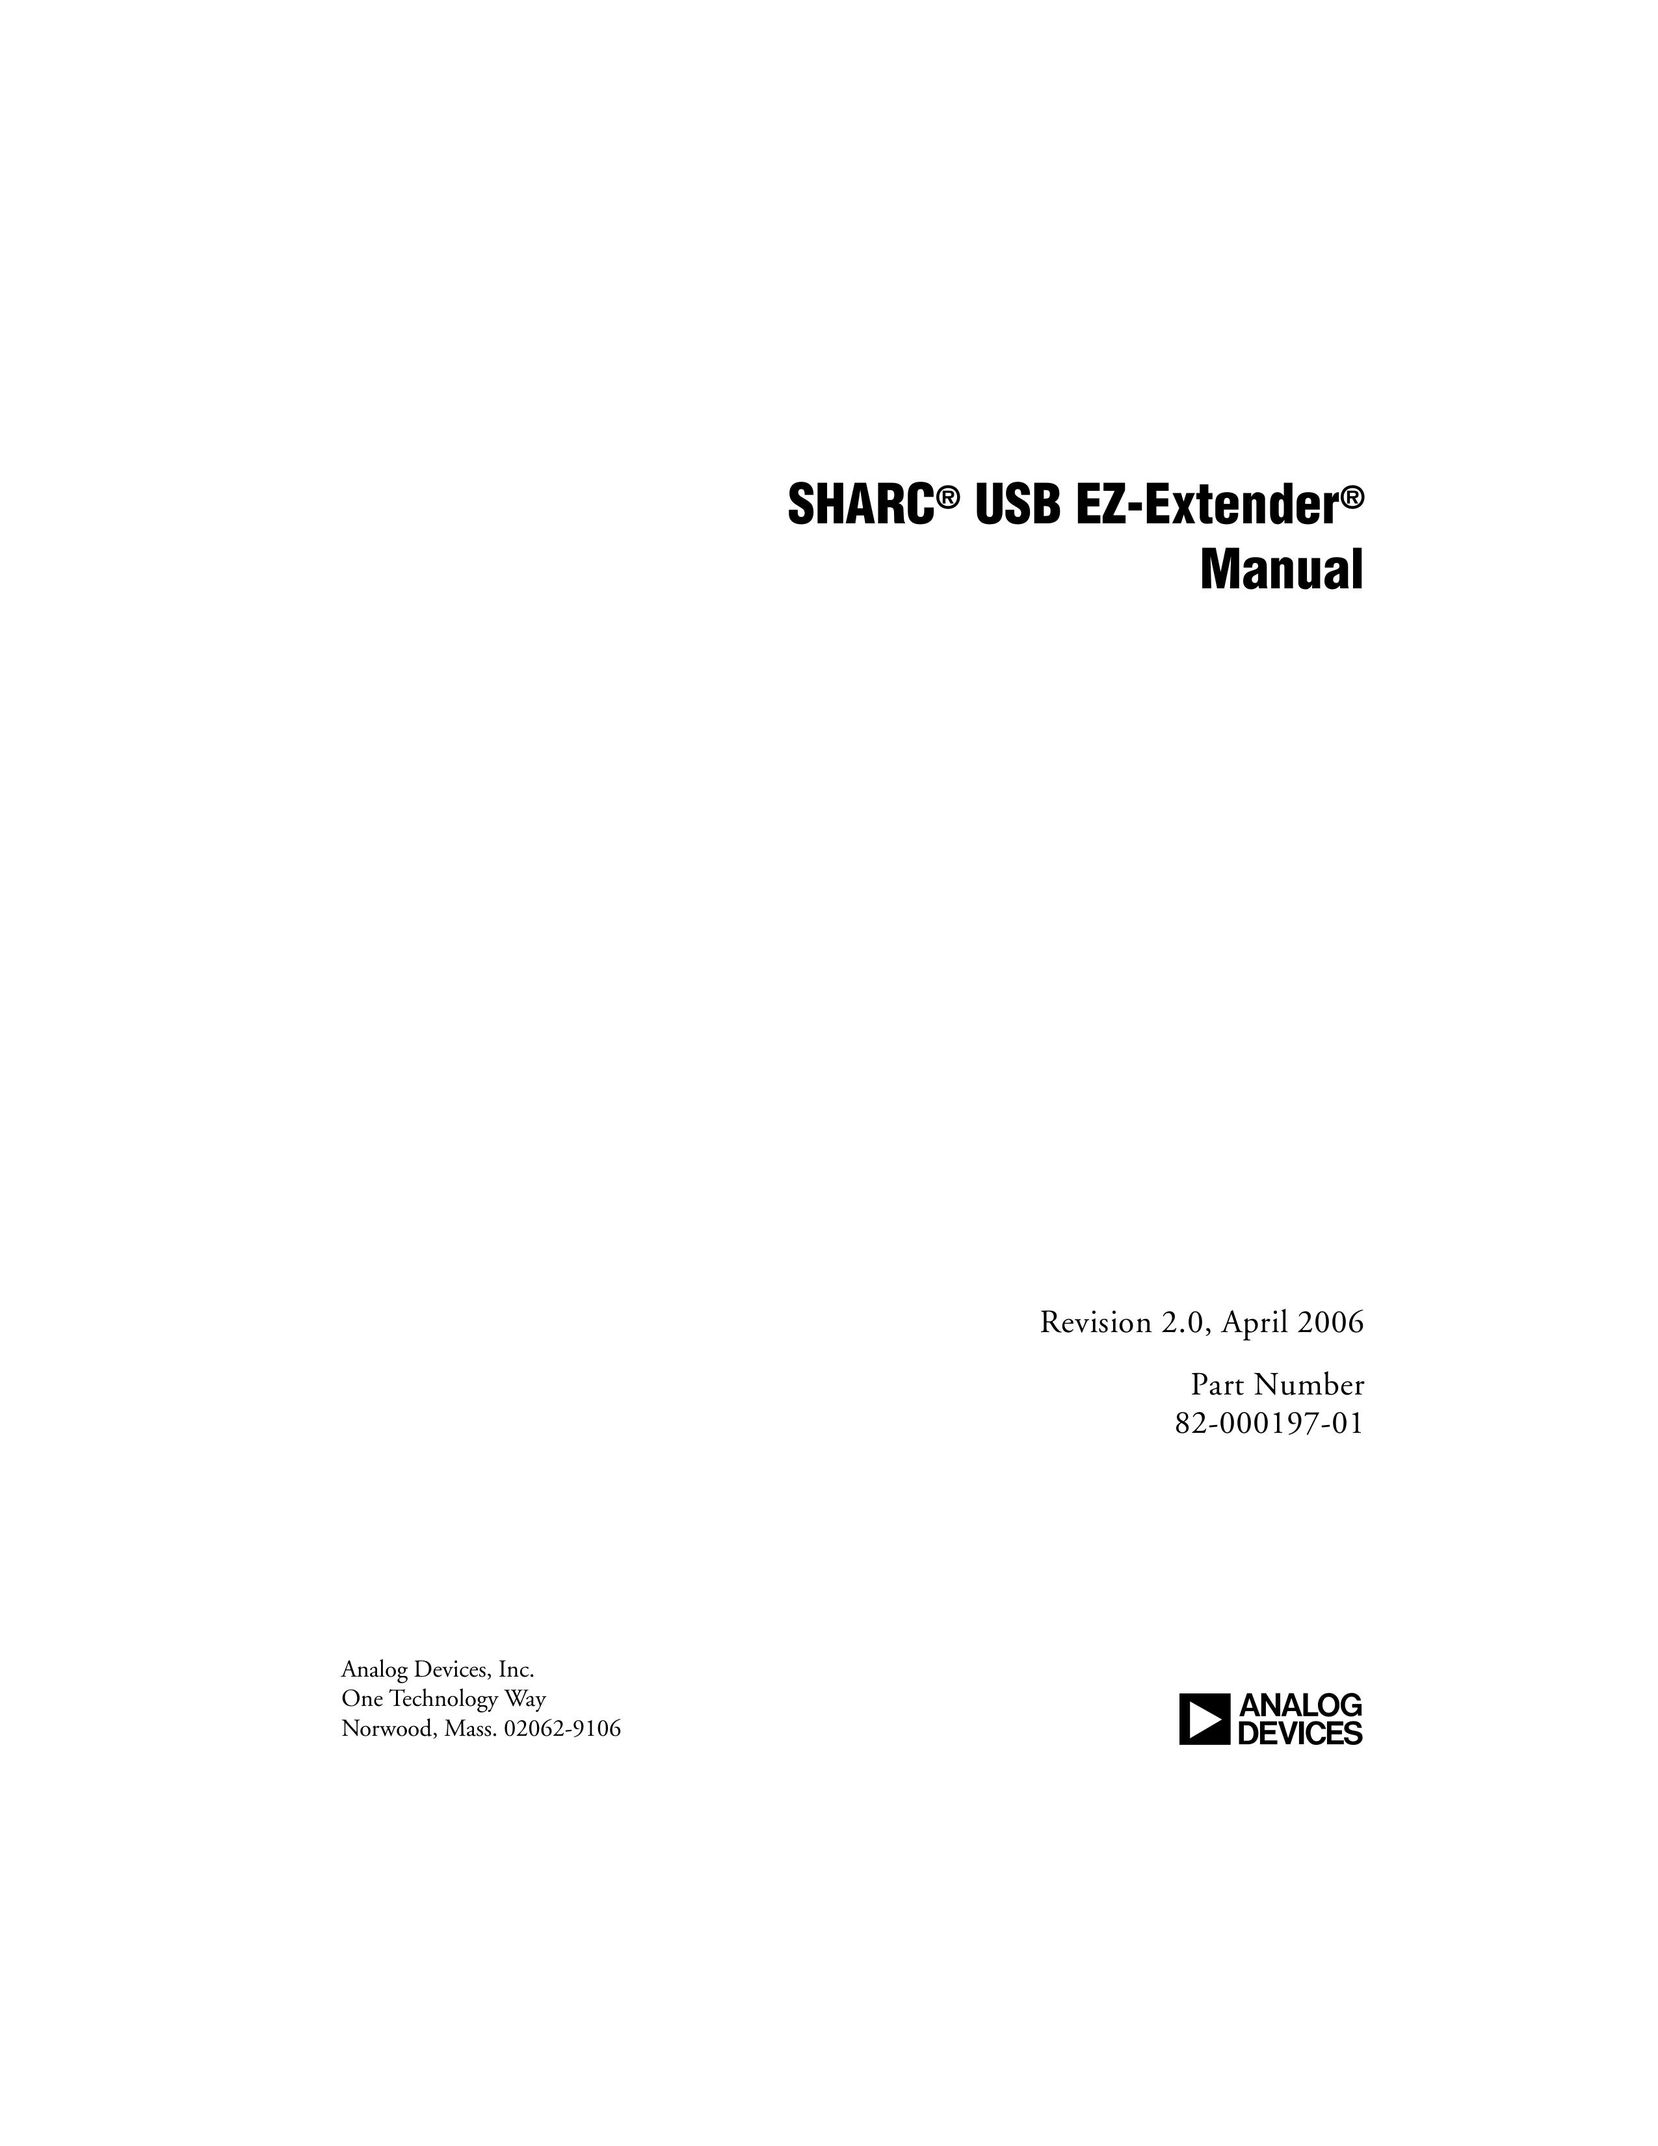 Analog Devices 82-000197-01 Network Card User Manual